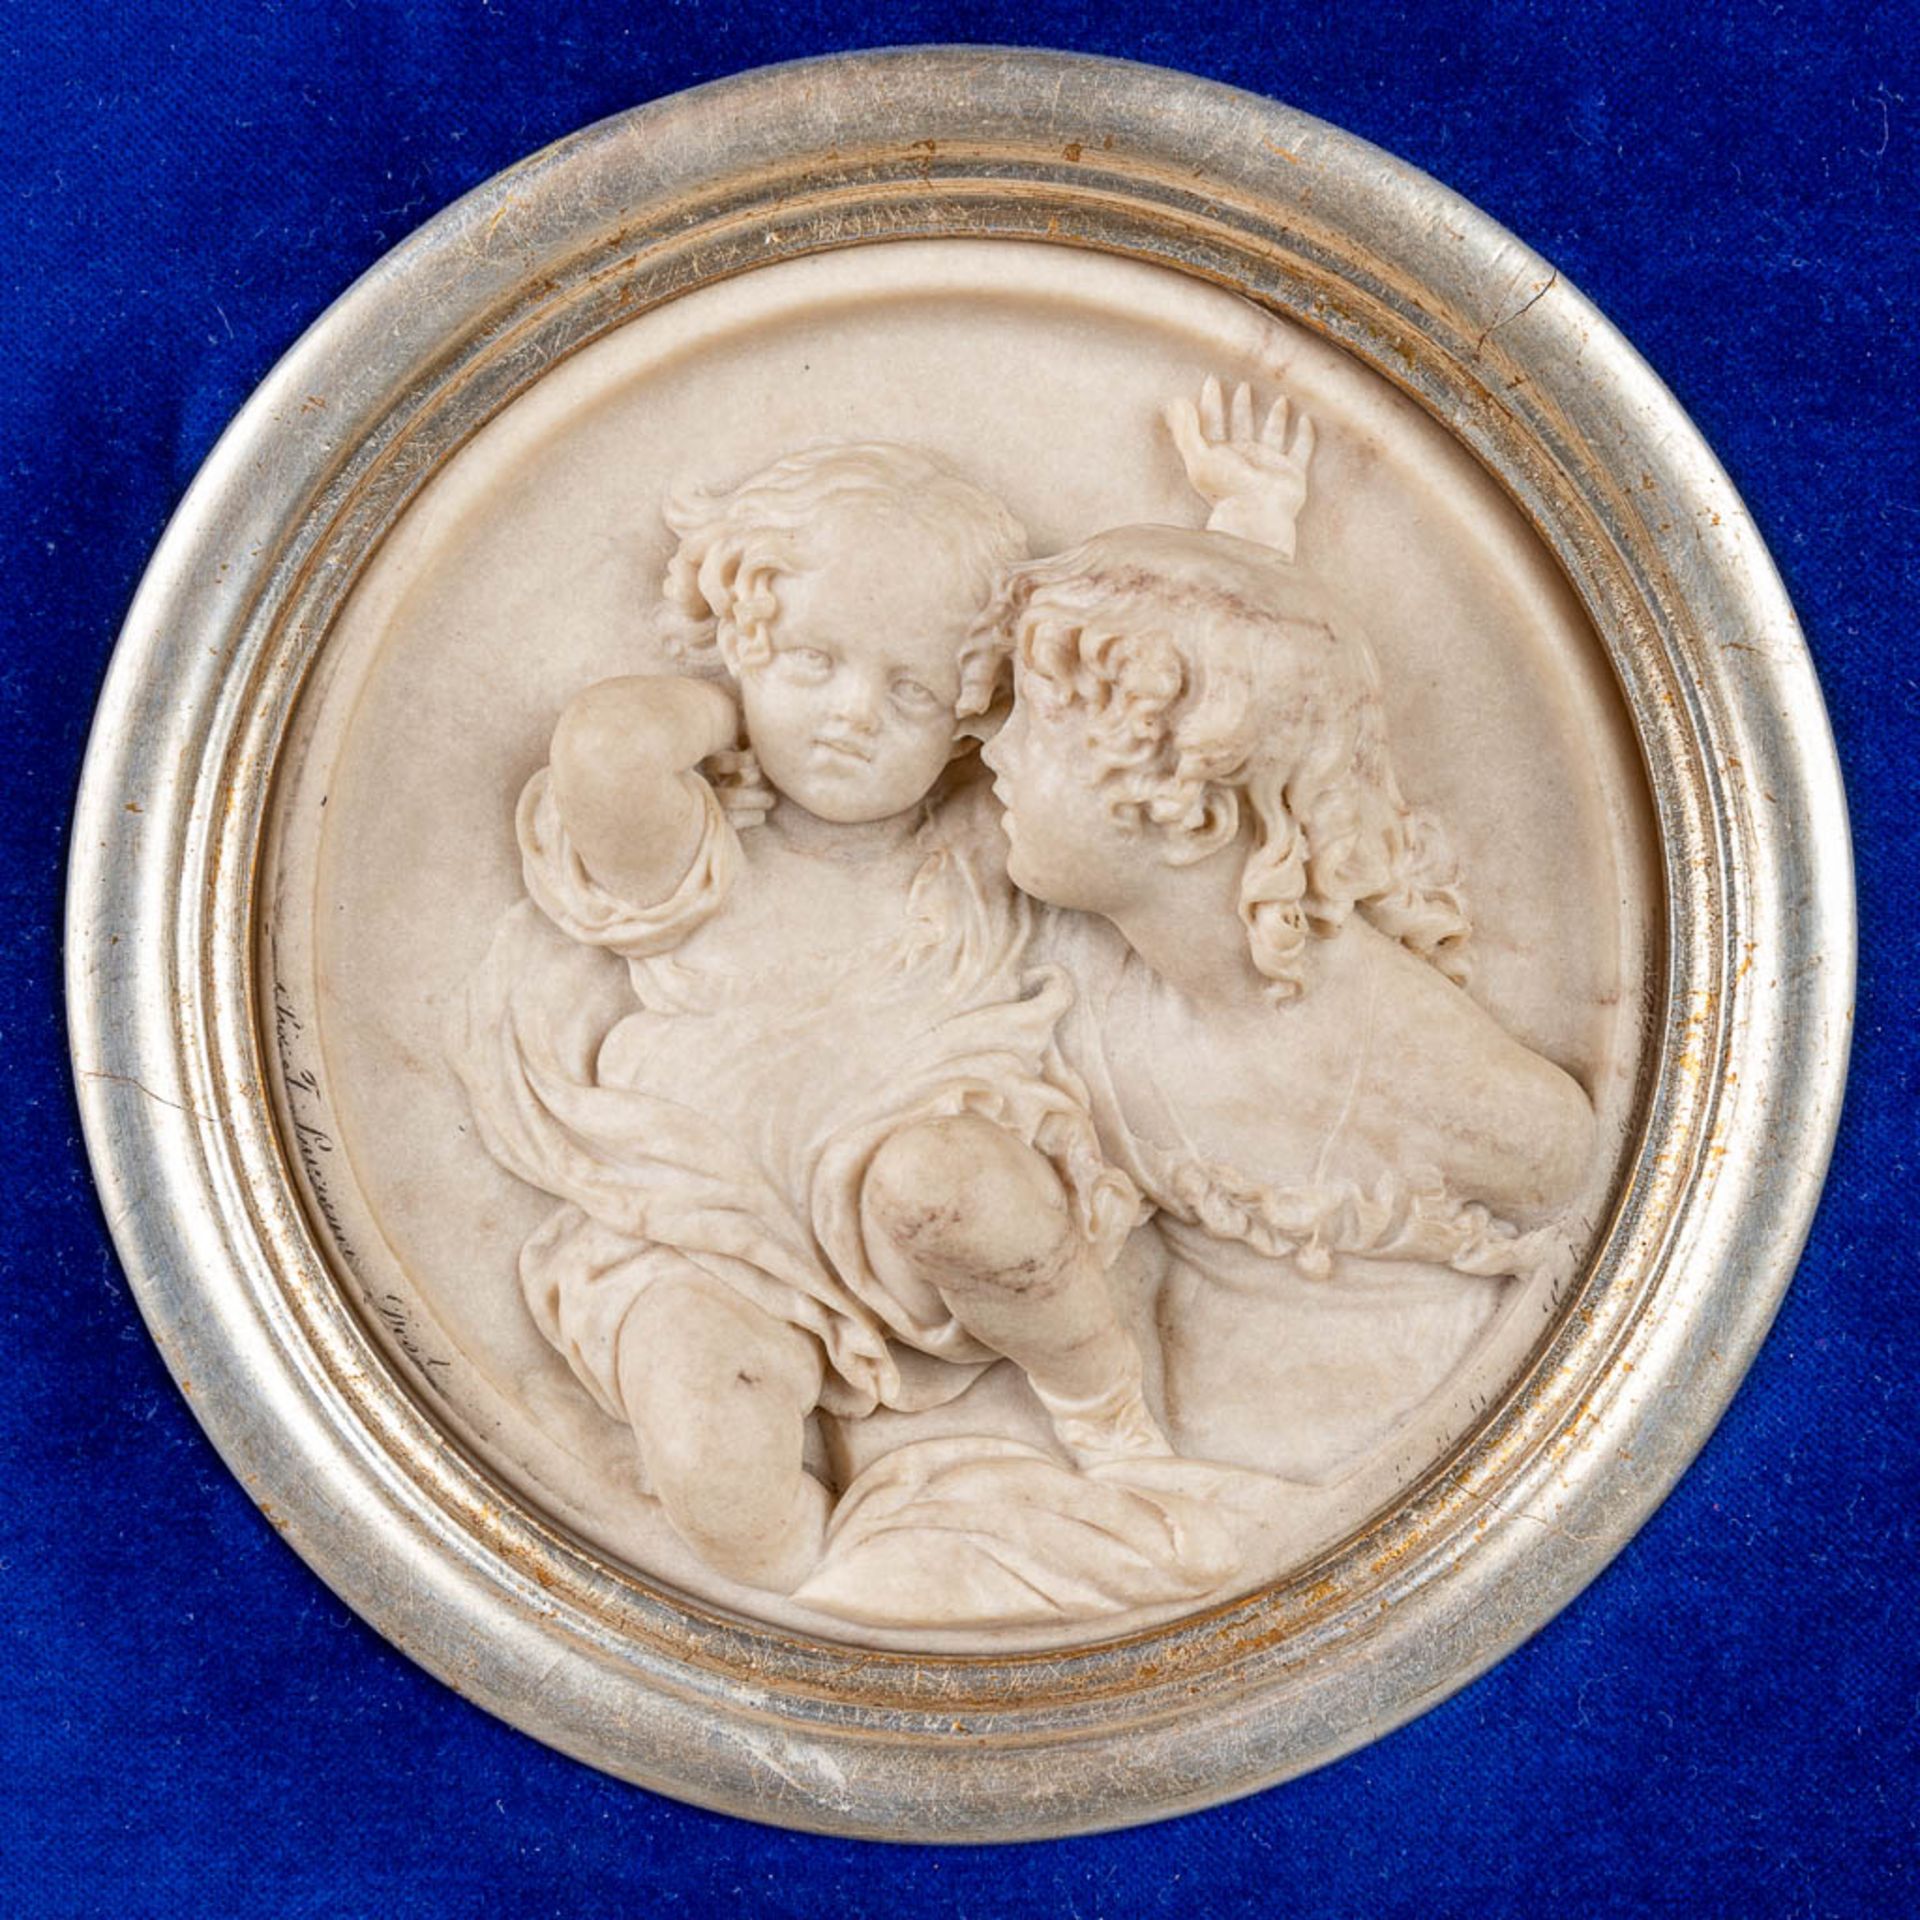 Edward William WYON (1811-1885)(attr.) A plaque made of sculptured marble with a bronze coin. - Image 7 of 8